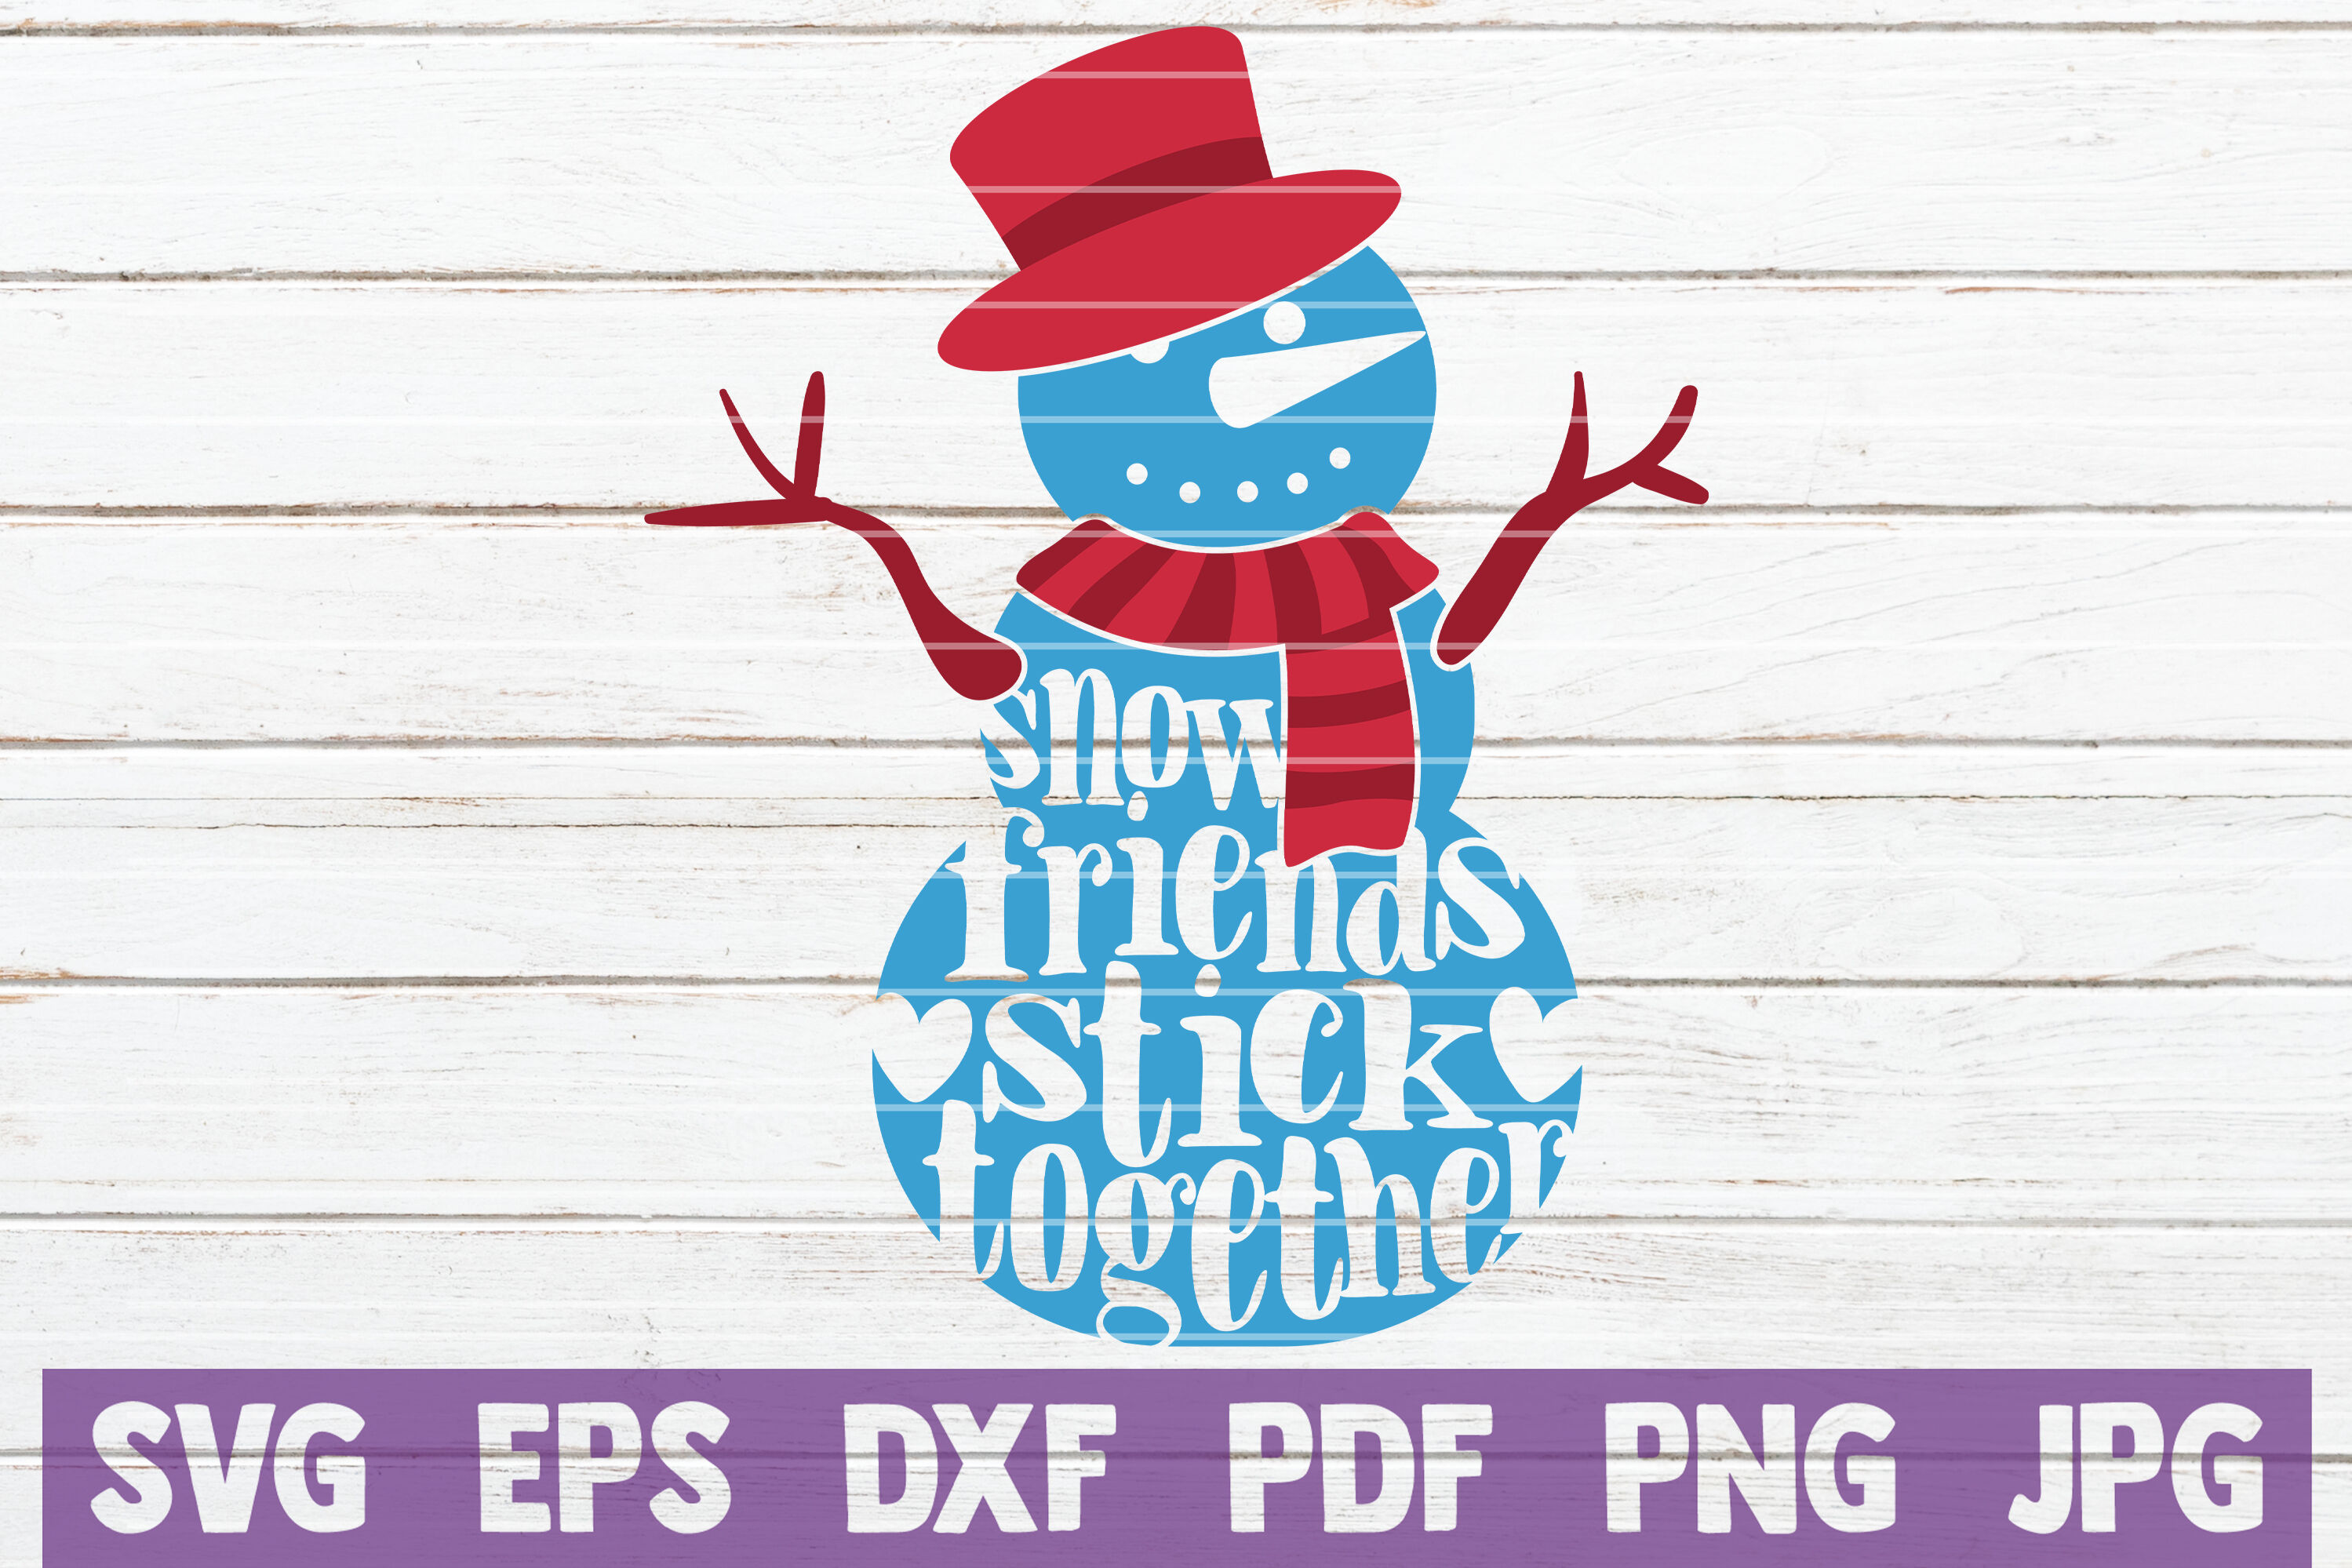 Snow Friends Stick Together Svg Cut File By Mintymarshmallows Thehungryjpeg Com